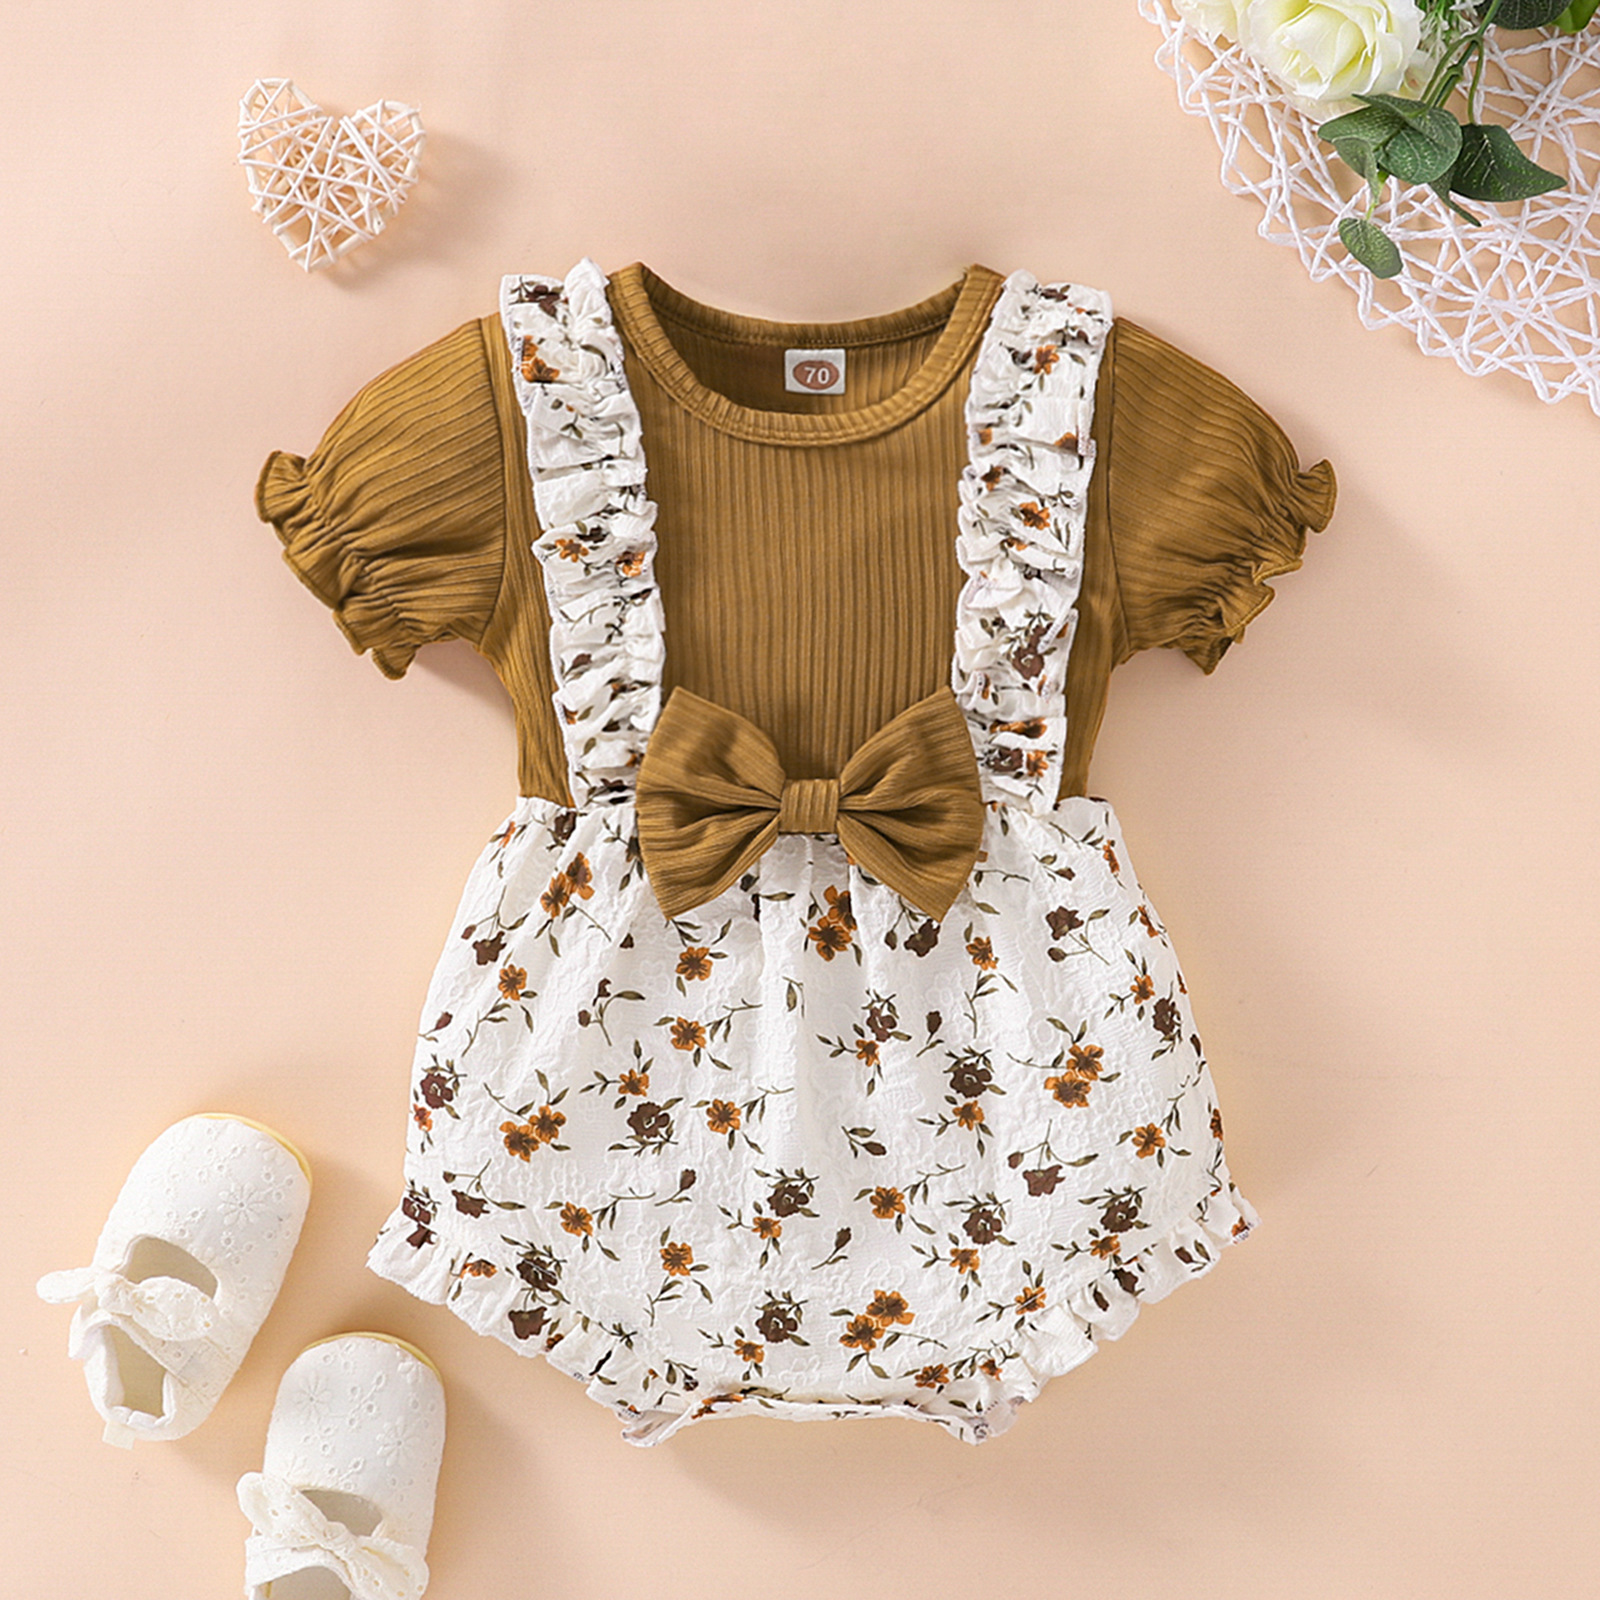 Baby Lace Ruffle Tops & Floral Suspender Dresss Set